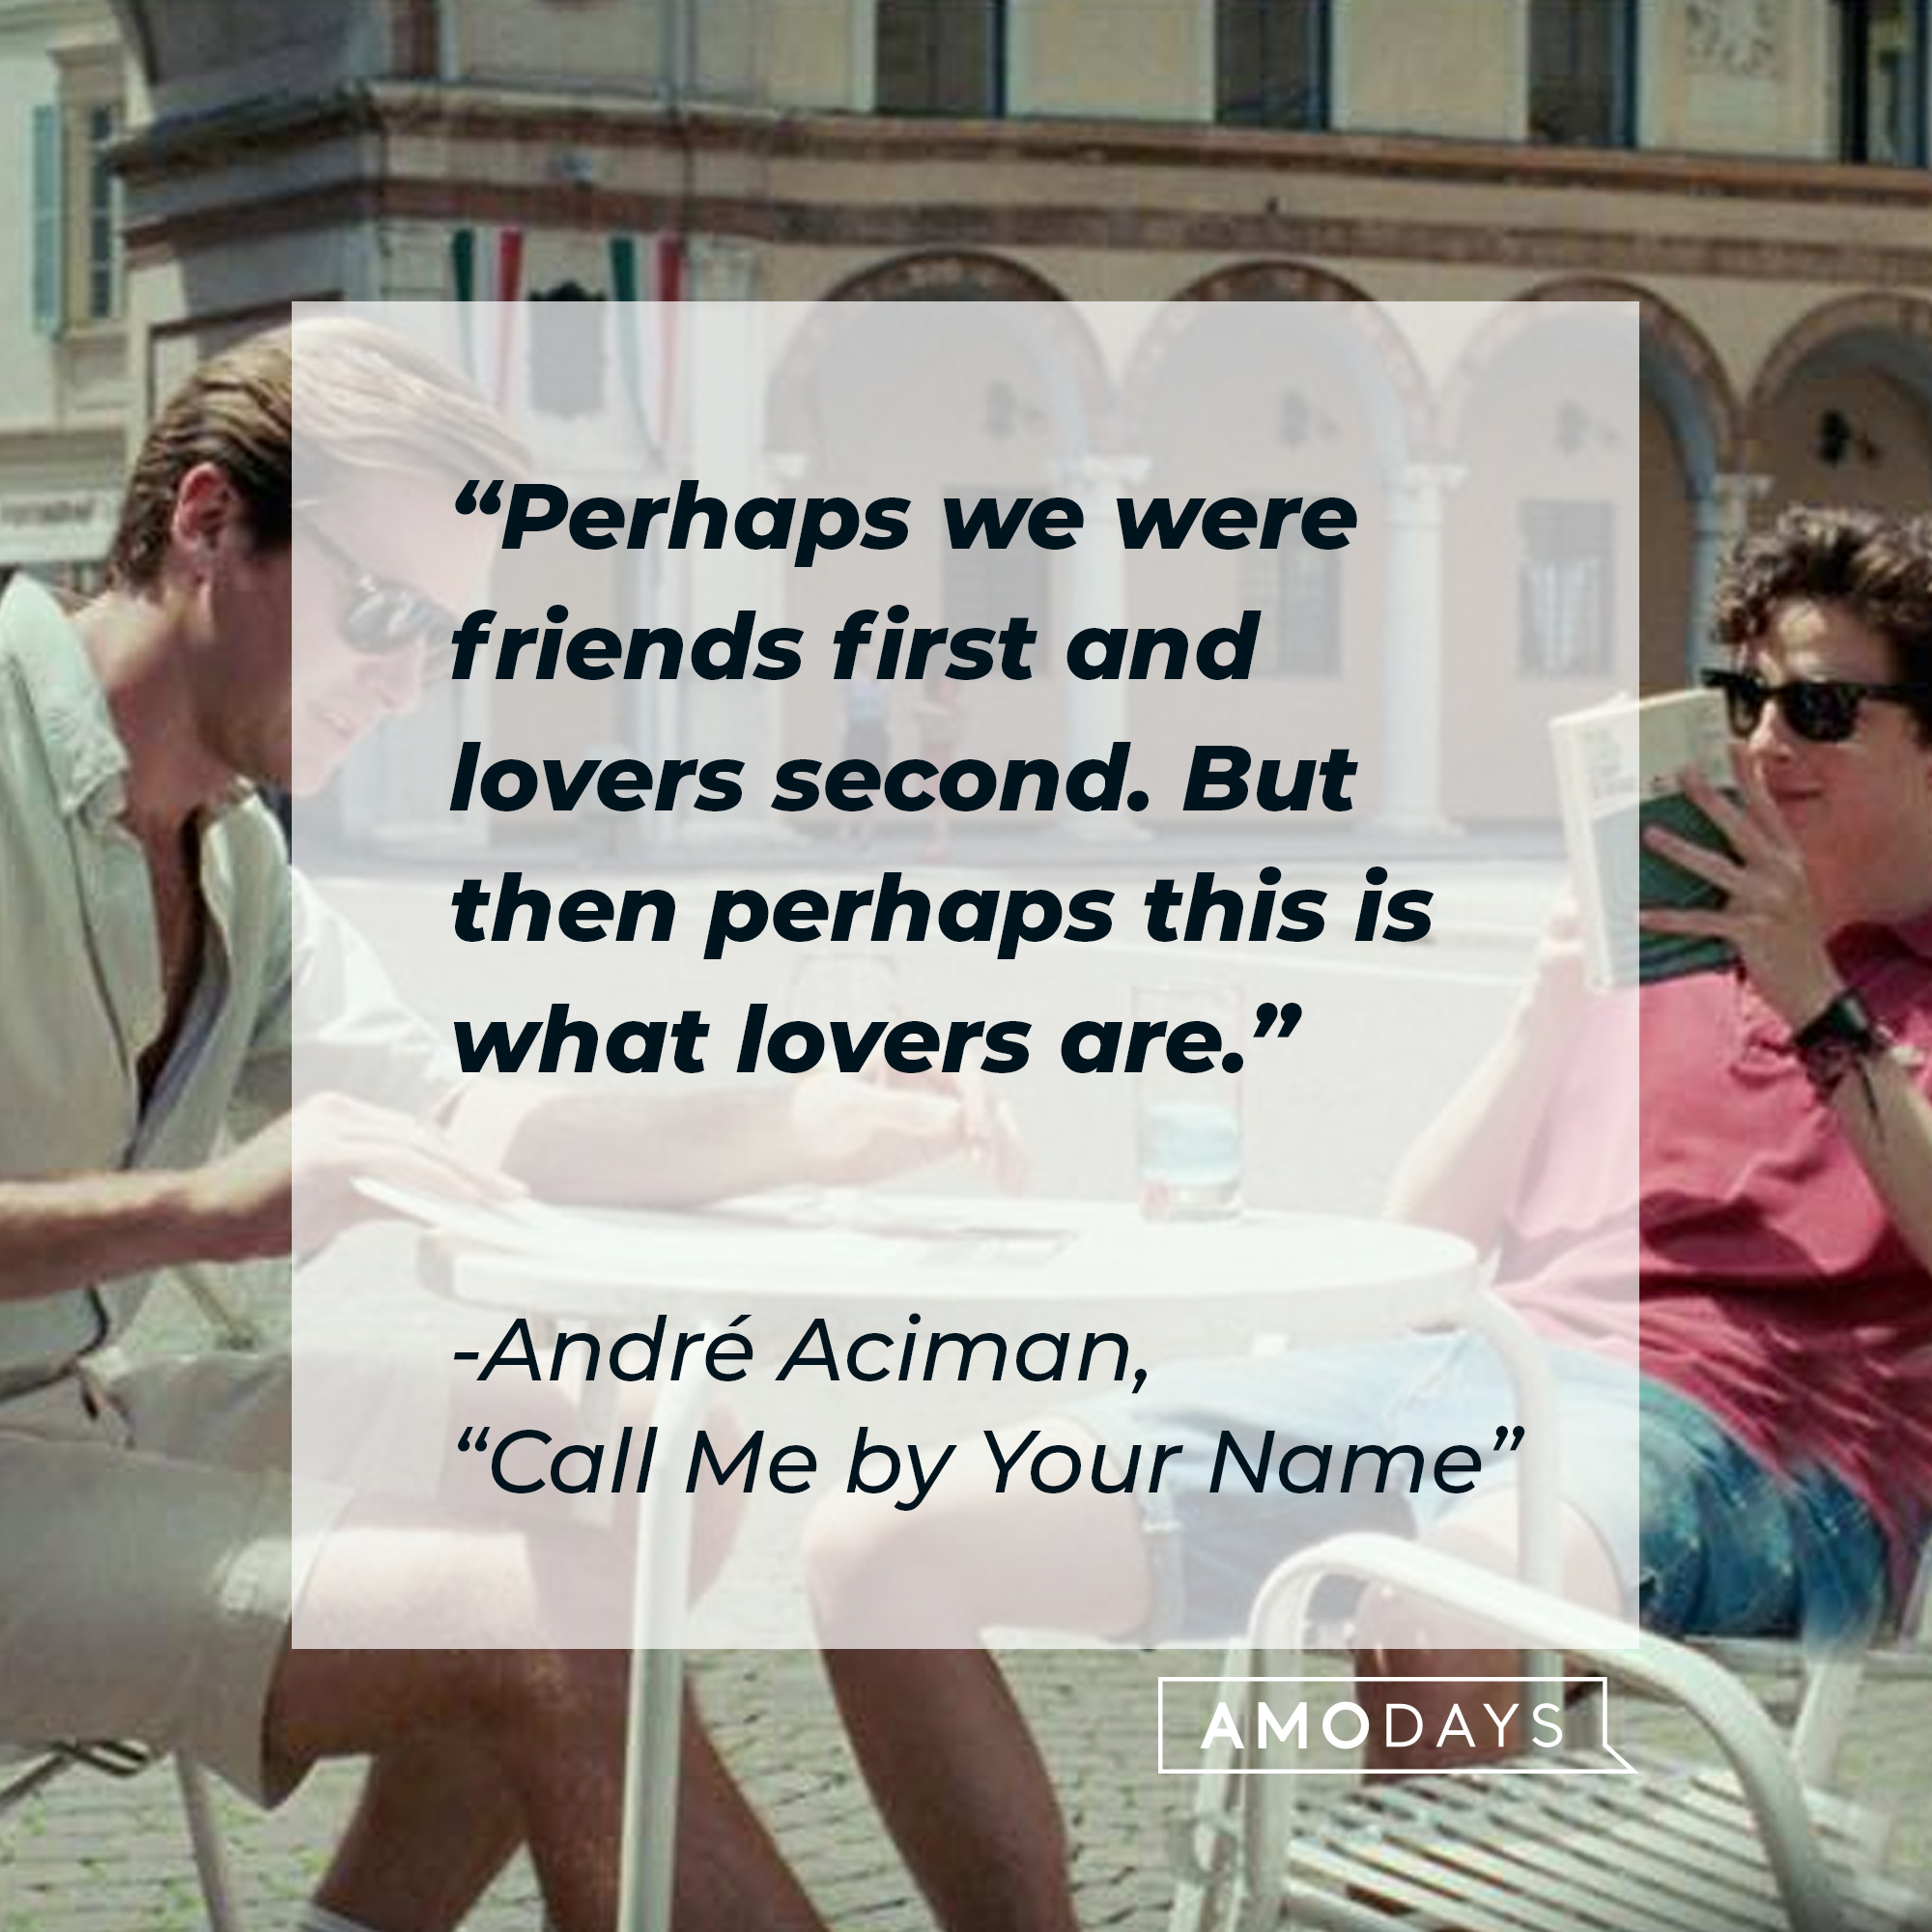 Characters Elio and Oliver from the film “Call Me By Your Name,” with a quote by the author, André Aciman, from the book it’s based on: “Perhaps we were friends first and lovers second. But then perhaps this is what lovers are.” | Source: Facebook.com/CallMeByYourNameFilm